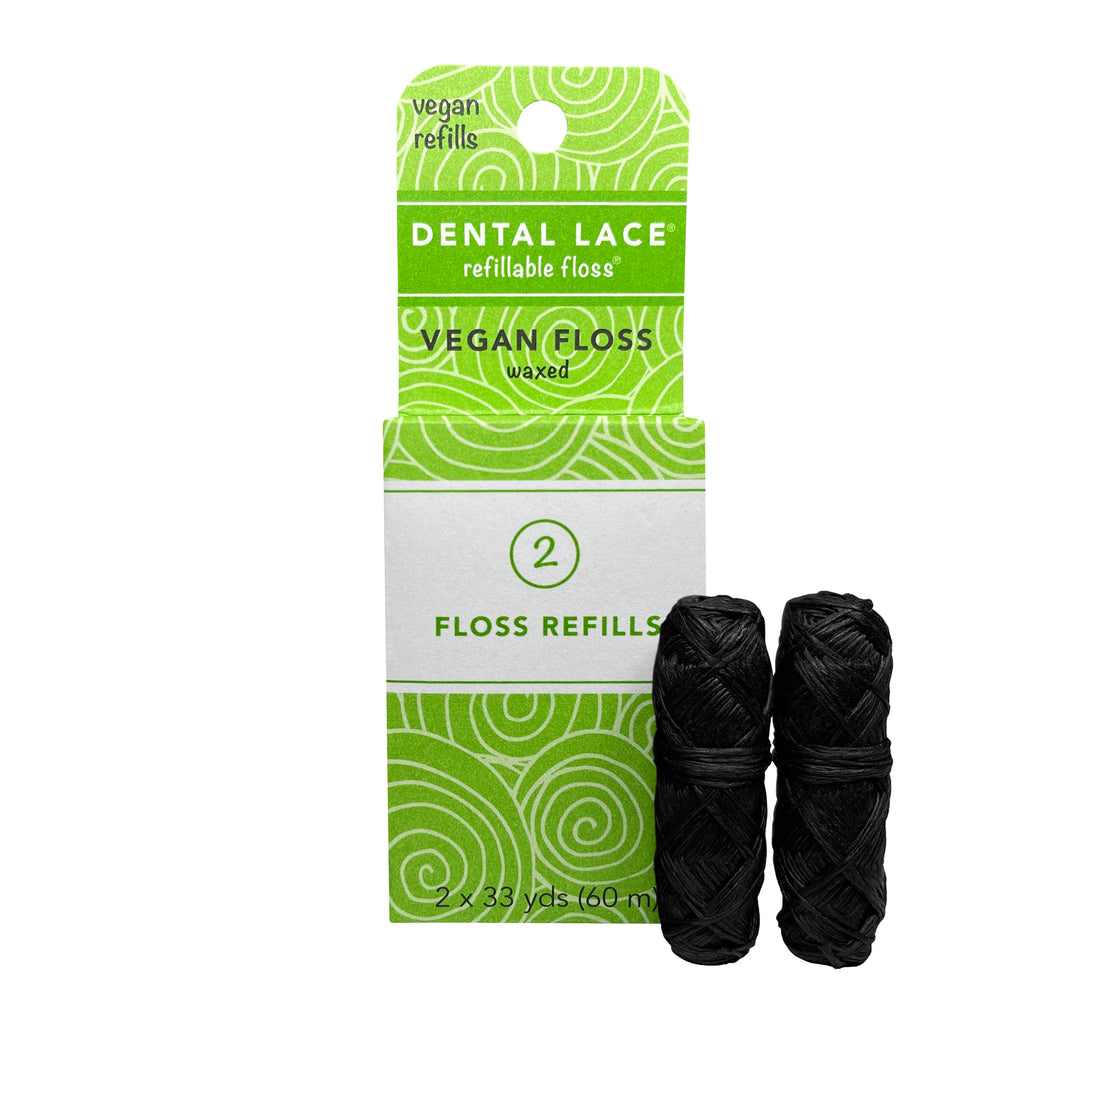 Dental Lace Vegan Bamboo Charcoal Infused Synthetic Floss Refills